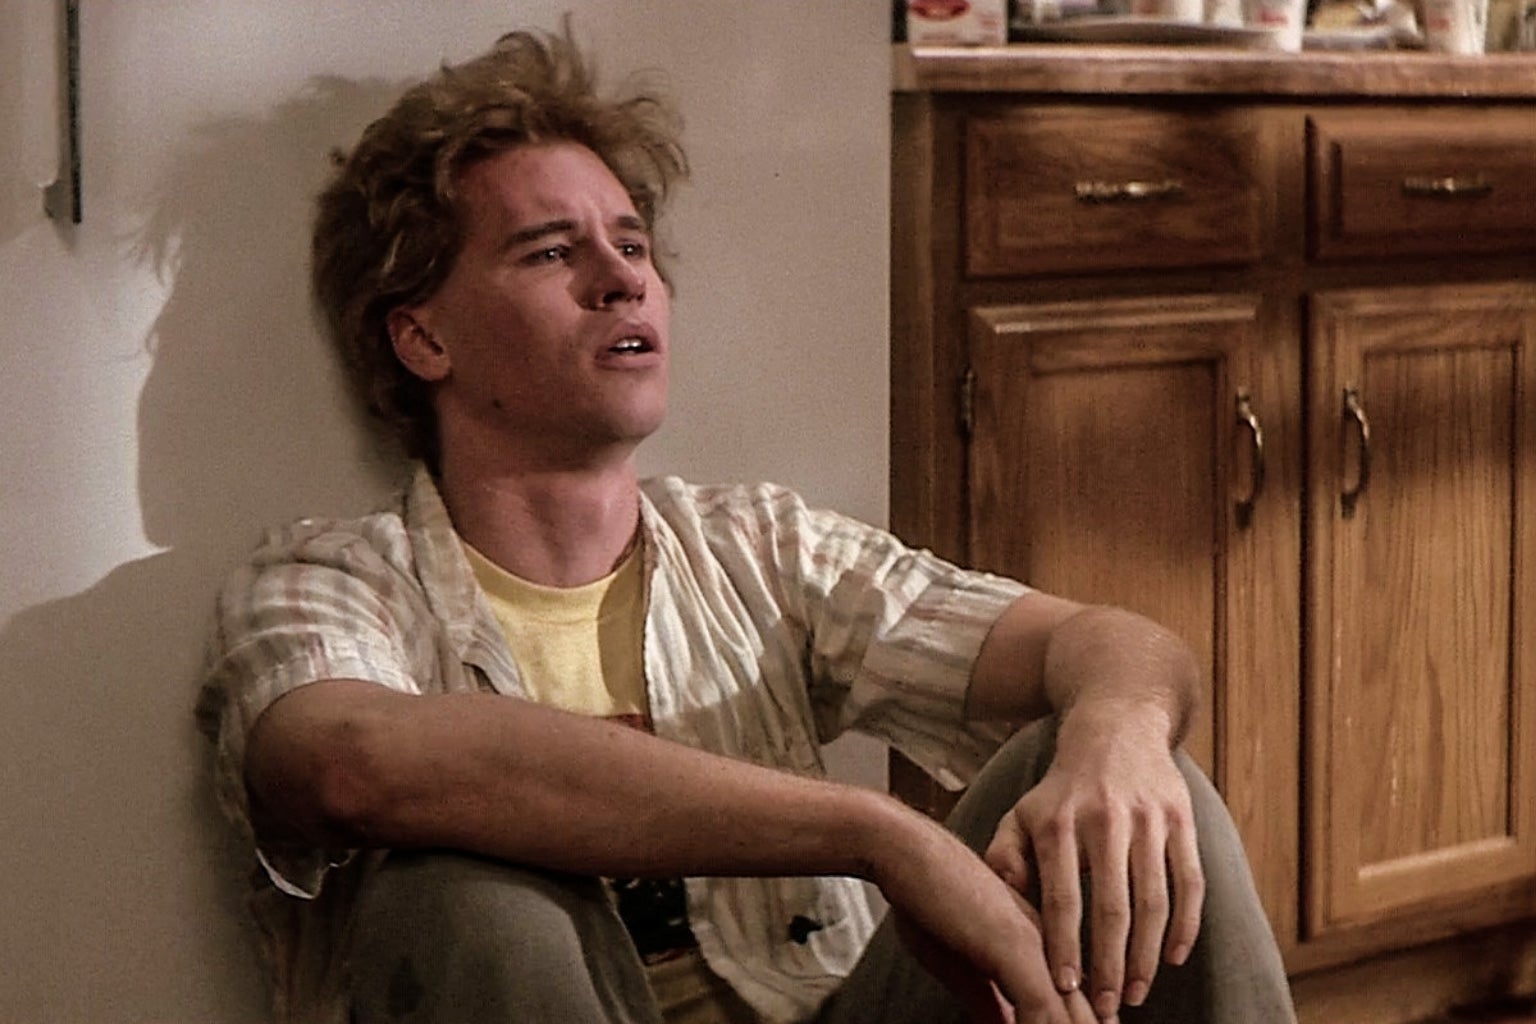 Chris Knight, the character played by Val Kilmer in Real Genius, sits leaning against a wall, with an exasperated expression on his face. Behind him to the right are wood cabinets and a countertop. 